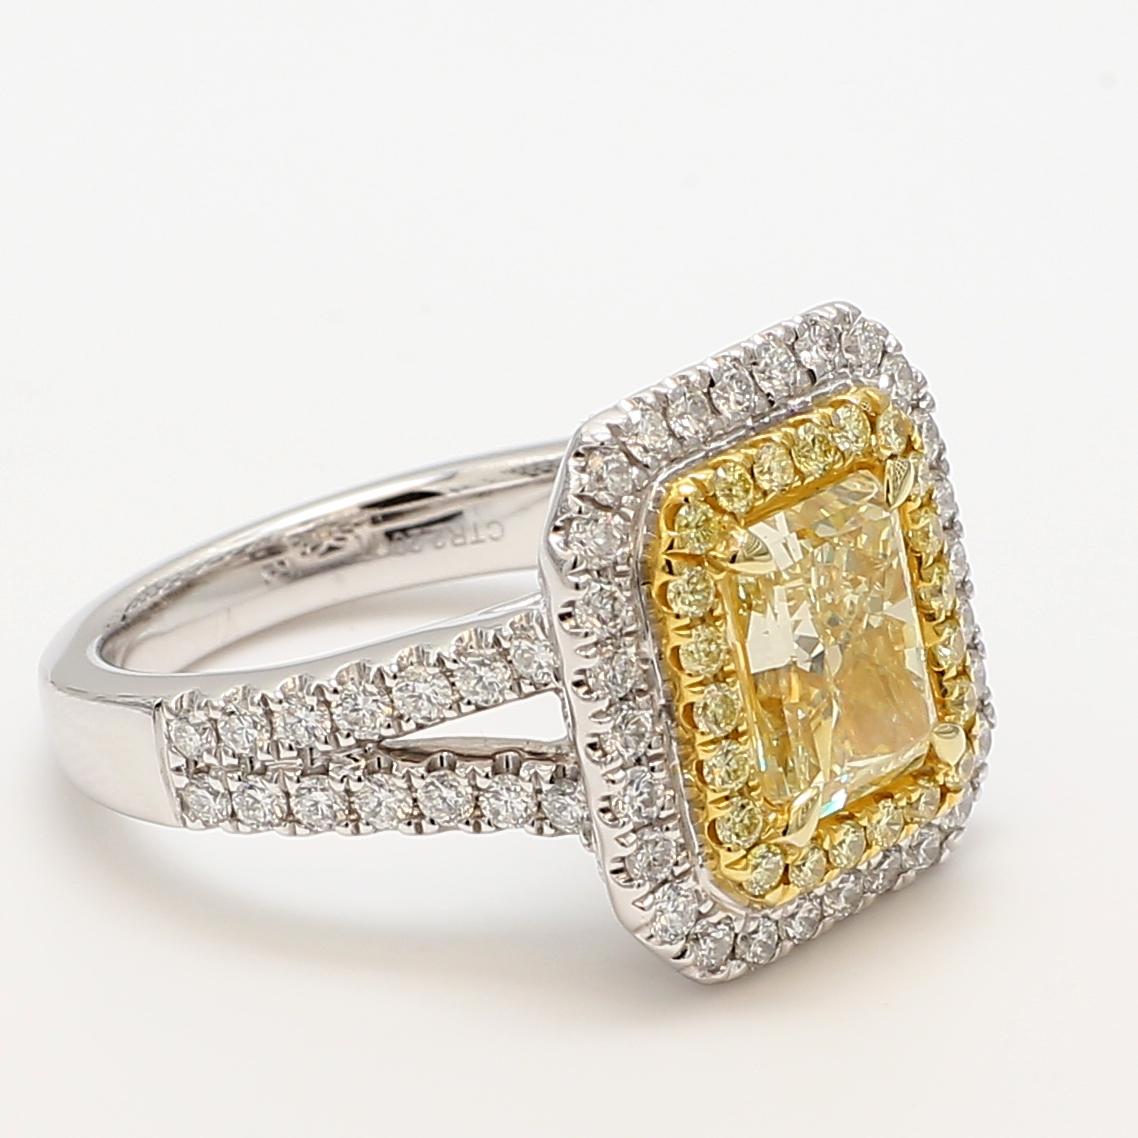 Contemporary GIA Certified 2.20 Carat Yellow Radiant Cut Diamond Halo Ring